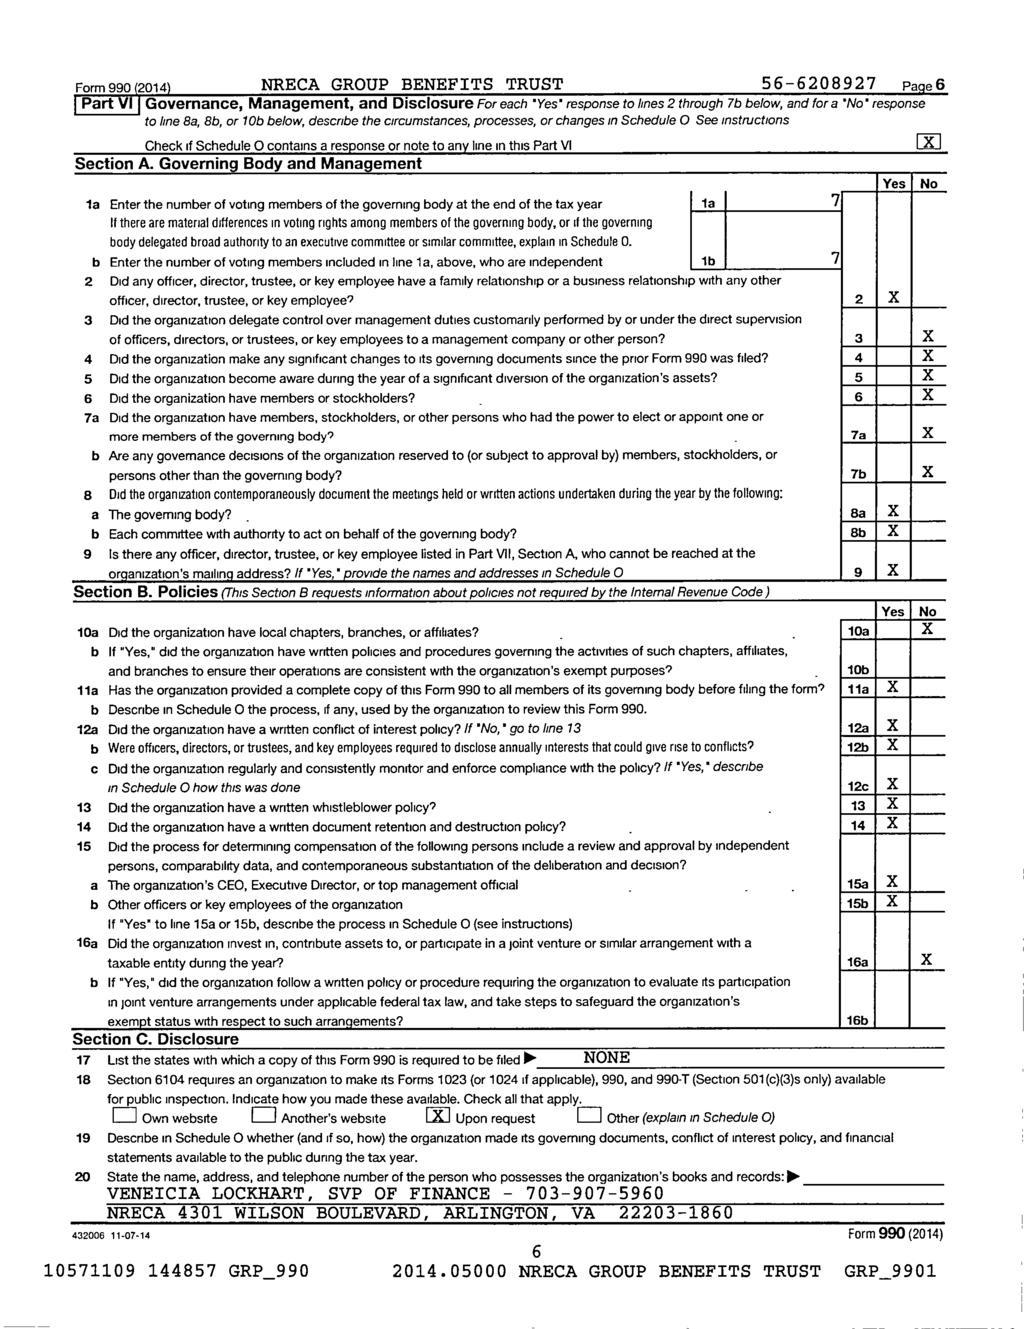 Form 990 2014 NRECA GROUP BENEFITS TRUST 56-6208927 Page 6 Part VI Governance, Management, and Disclosure For each 'Yes' response to lines 2 through 7b below, and for a 'No' response to line 8a, 8b,